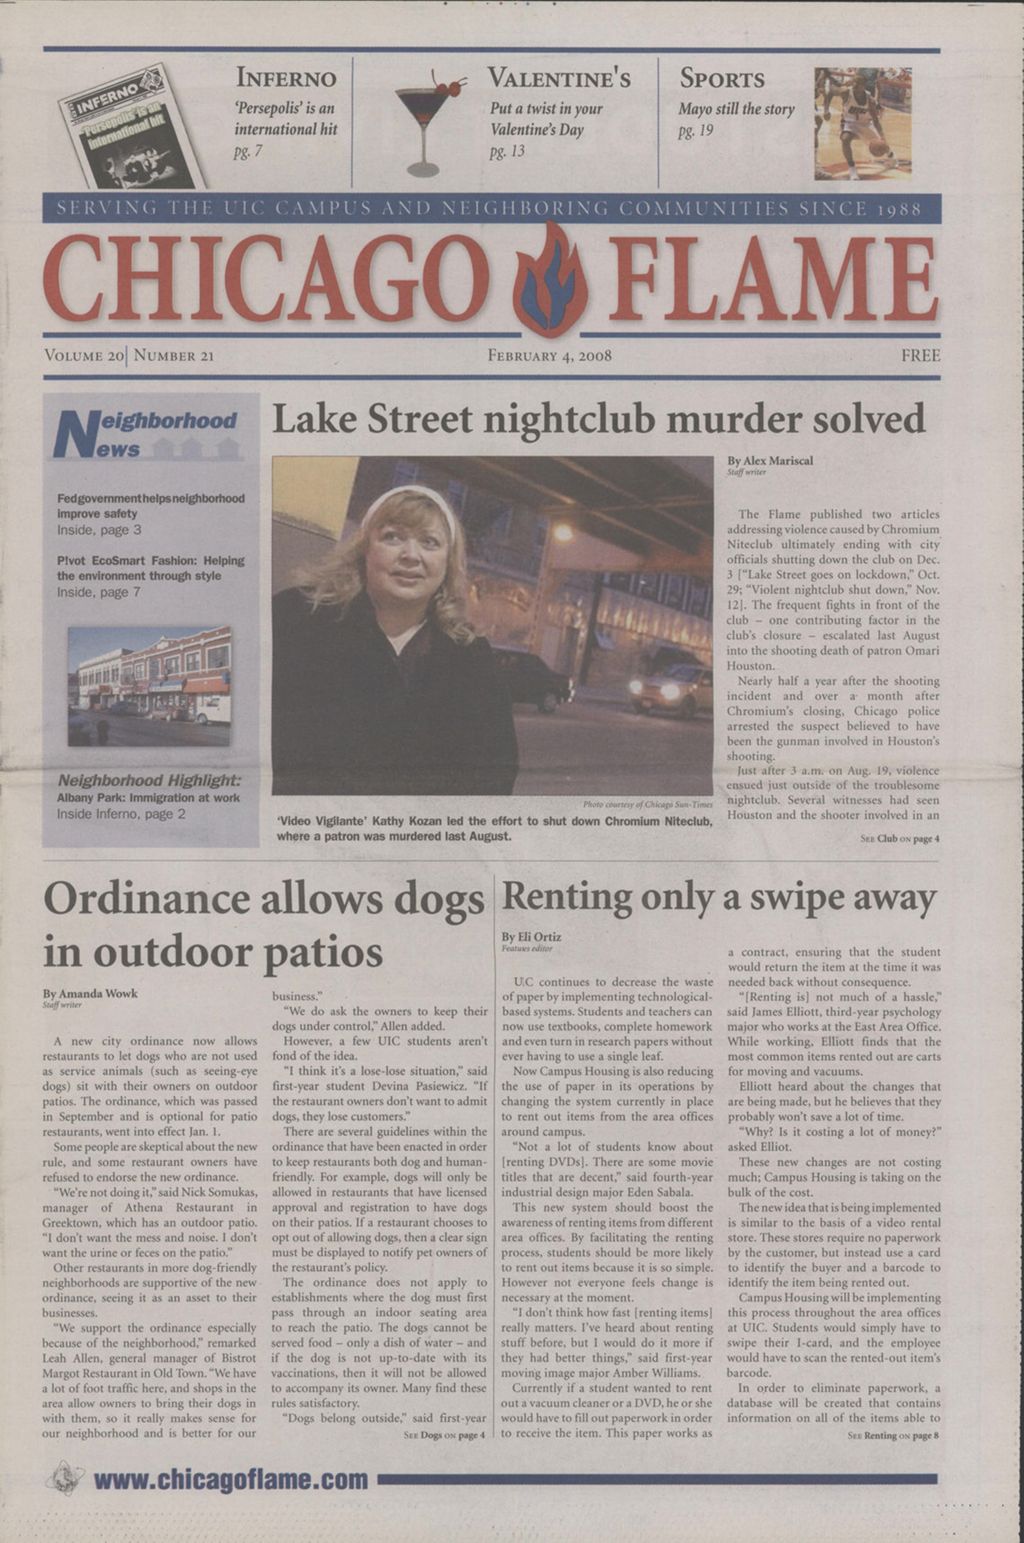 Chicago Flame (February 4, 2008)